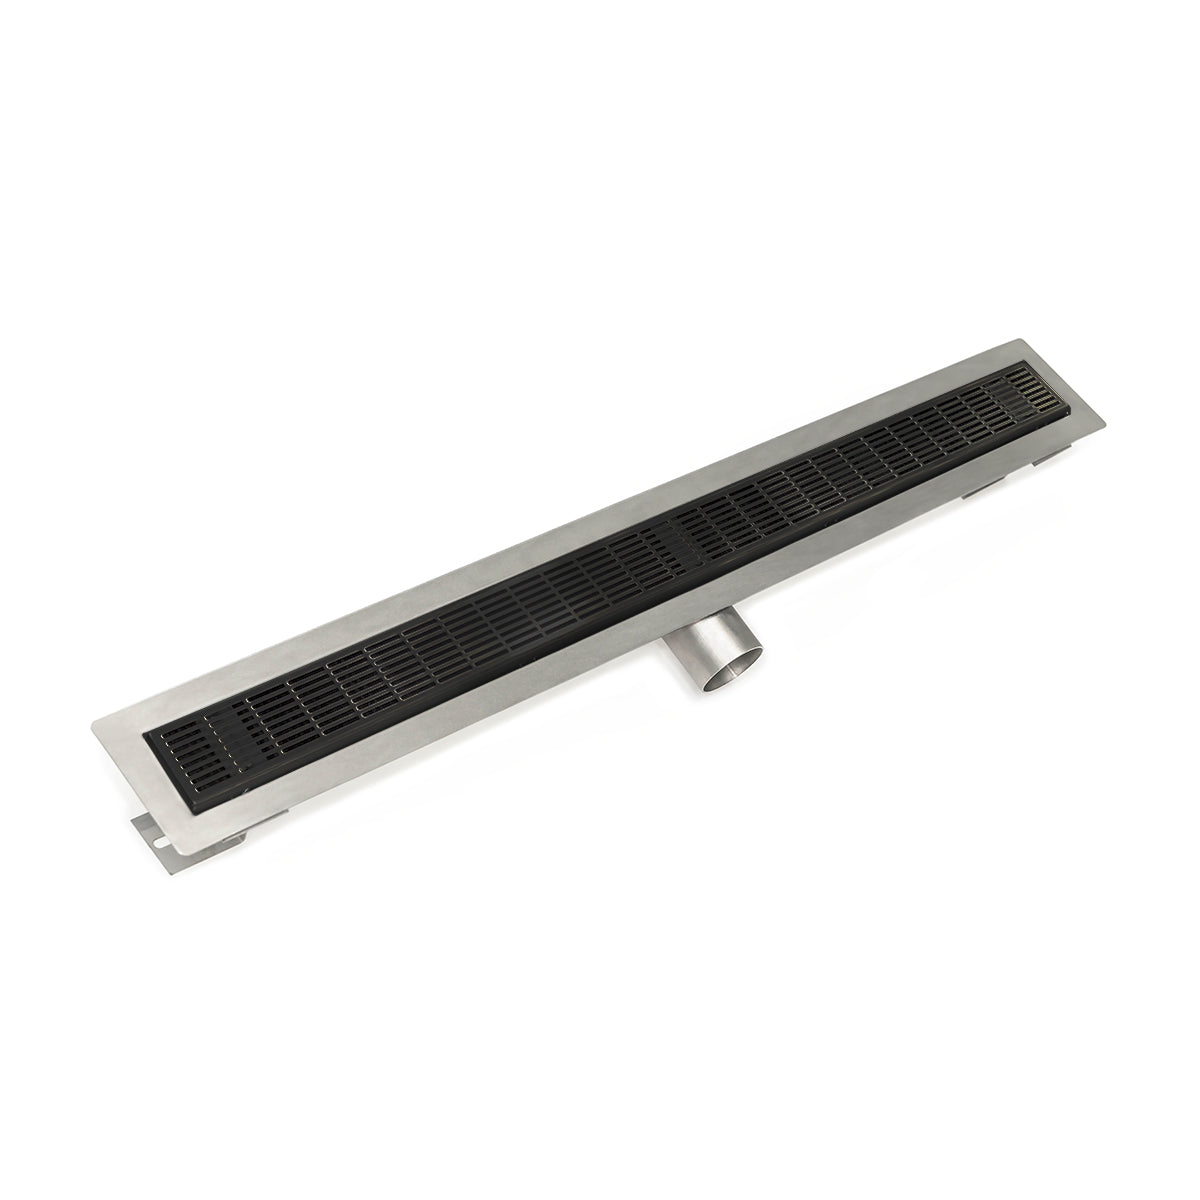 Infinity Drain 60" FT Series Side Outlet Linear Drain Kit with 2 1/2" Perforated Slotted Grate